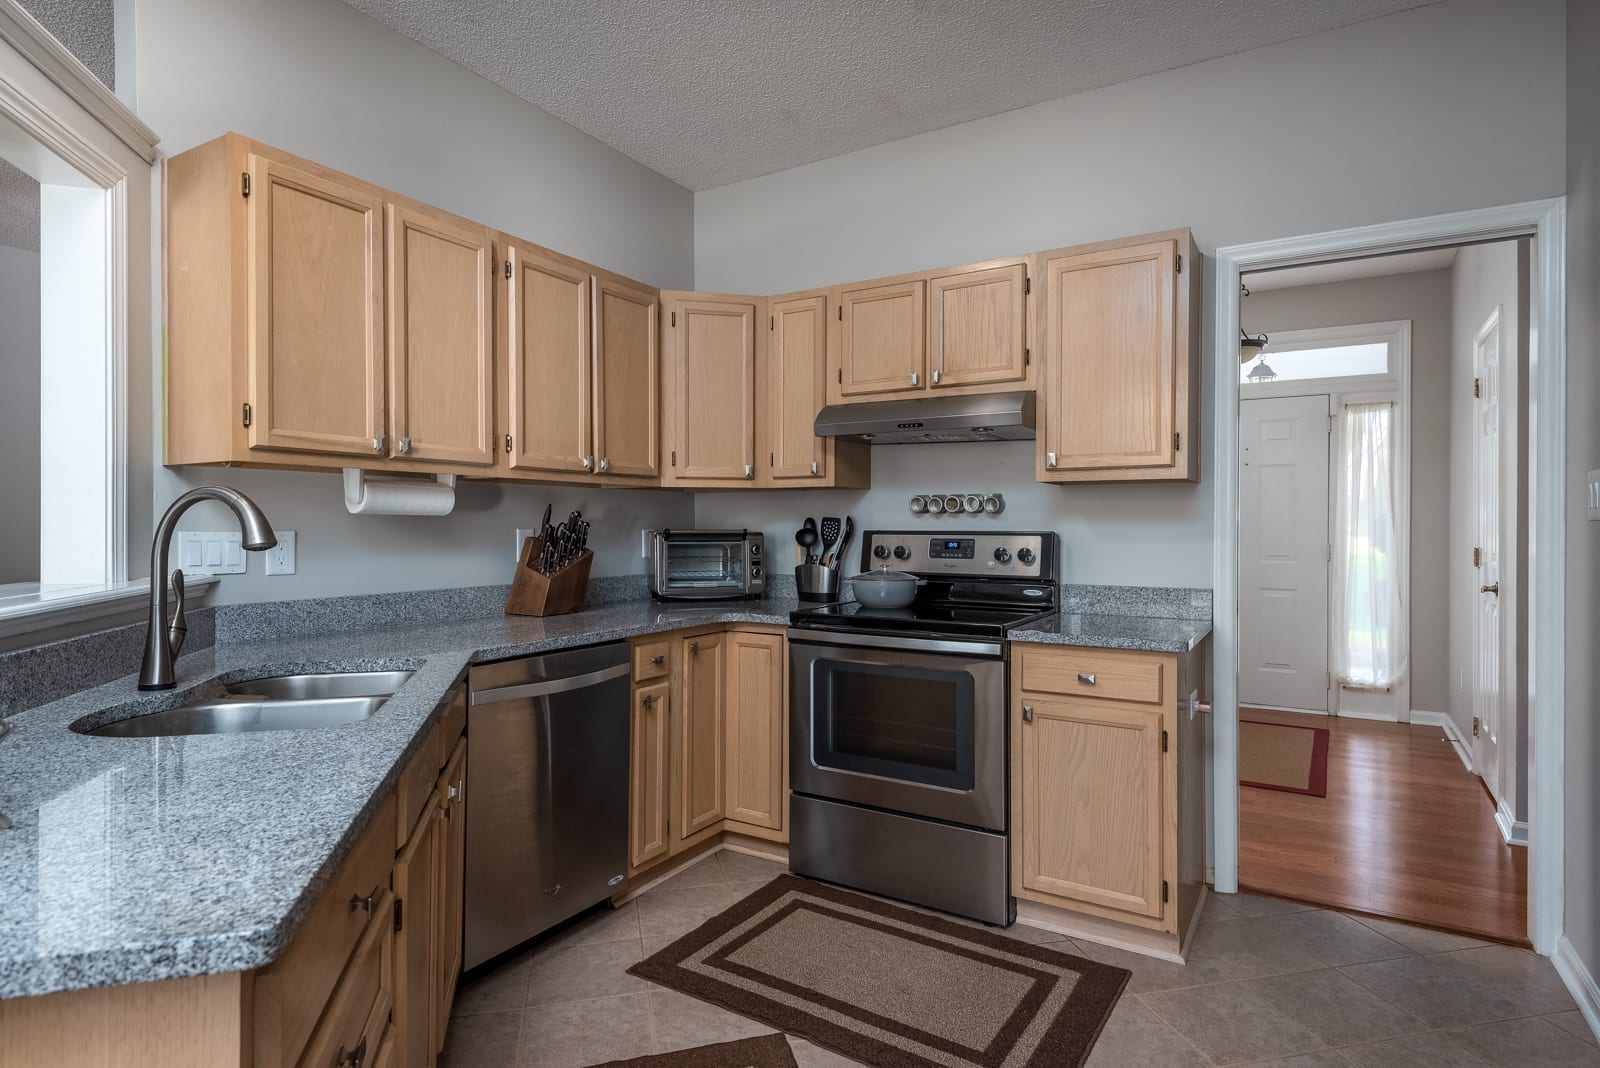 Kitchen of home sold in Cameron Wood